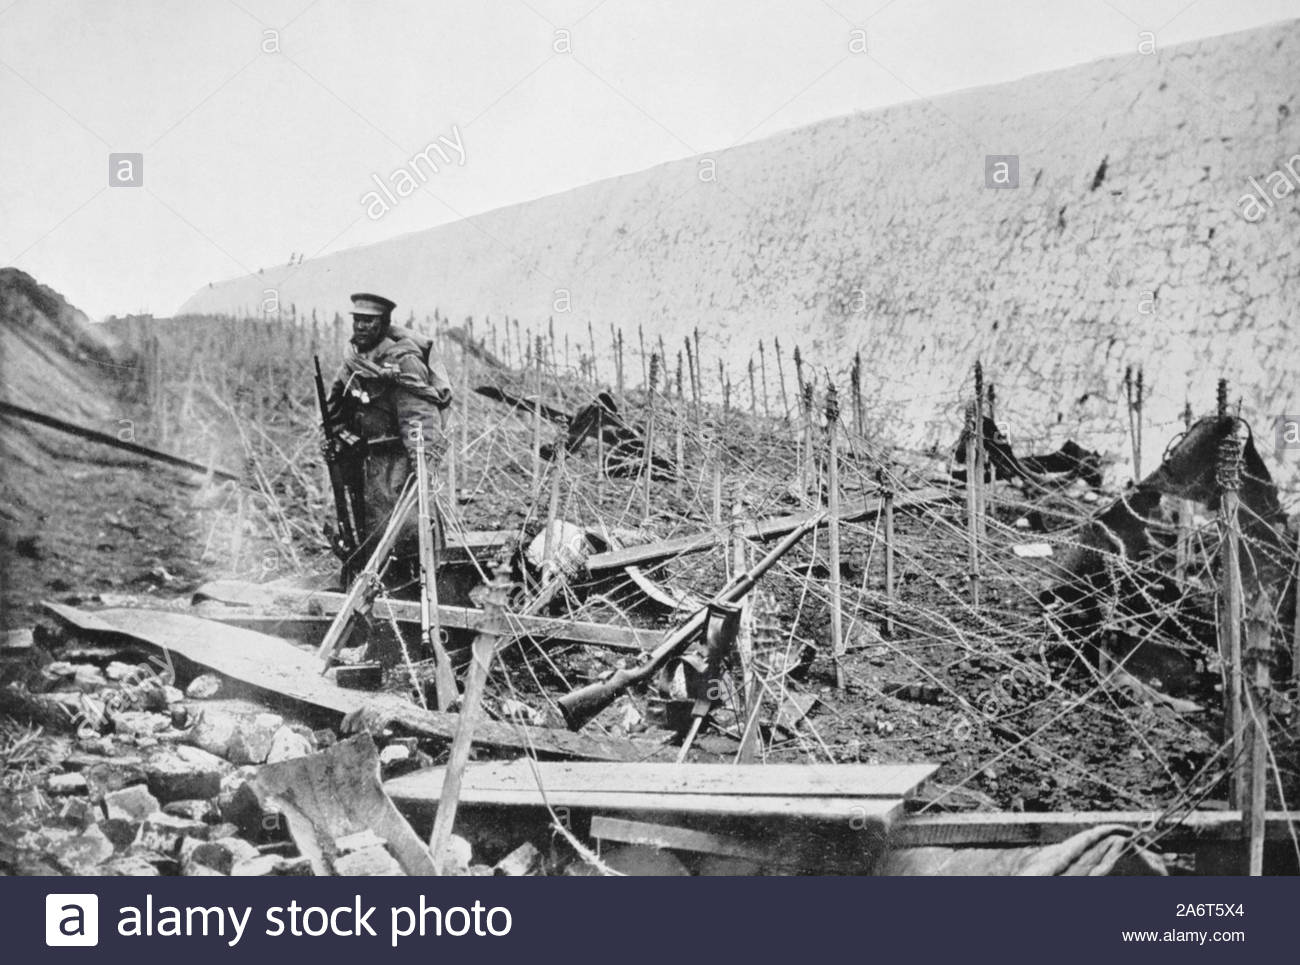 WW1 Barbed wire fence in a fort ditch at Tsingtao China during the siege, vintage photograph from 1914 Stock Photo